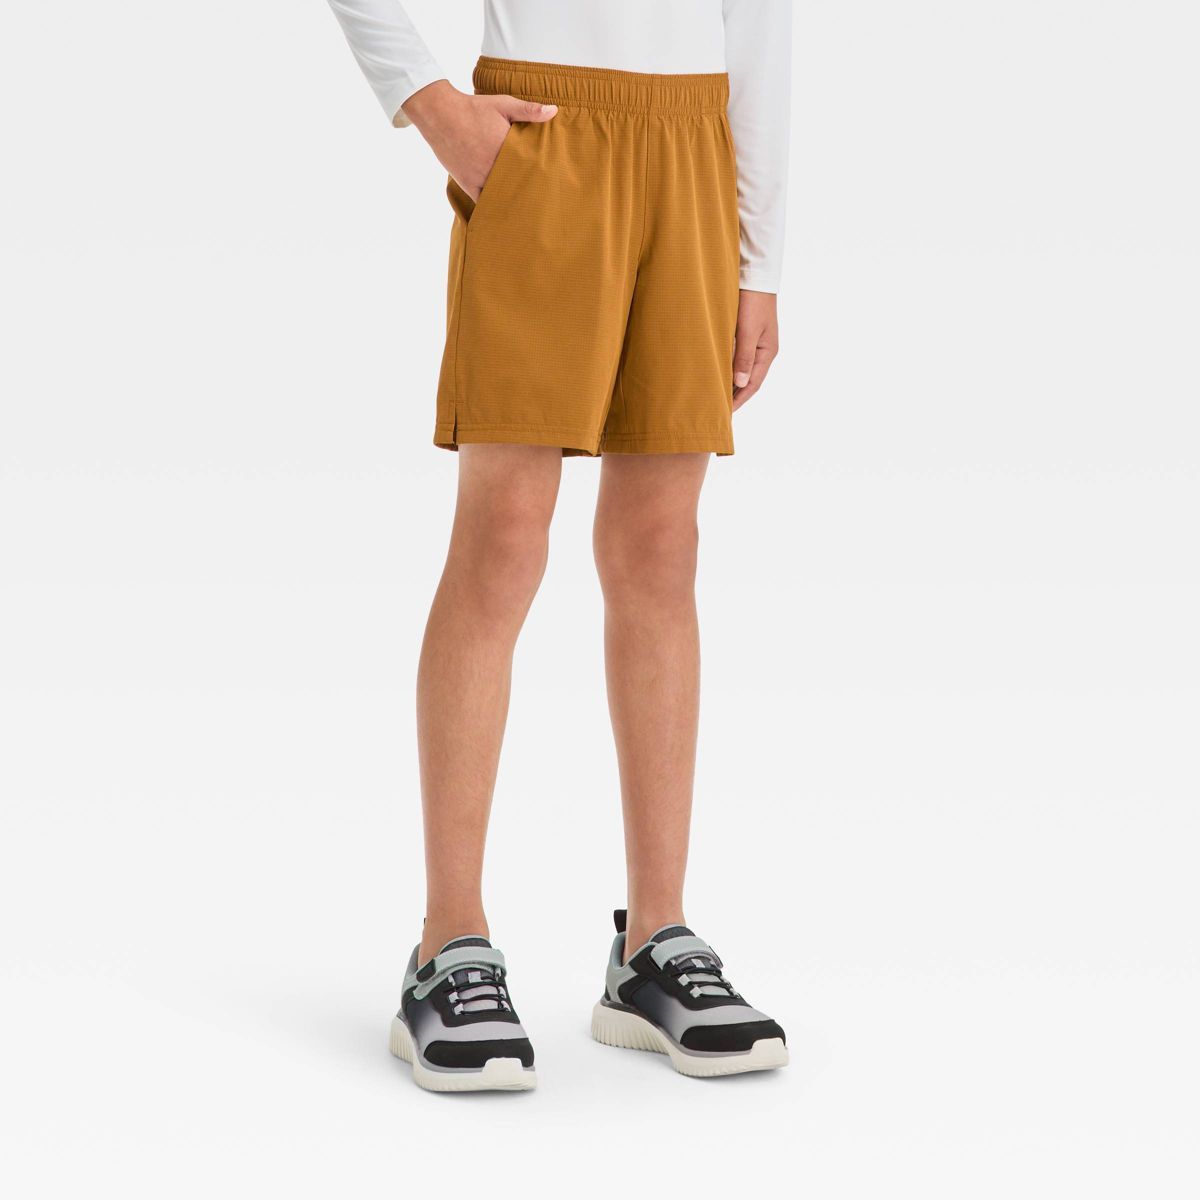 Boys' Woven Shorts - All In Motion™ Mustard Yellow M | Target